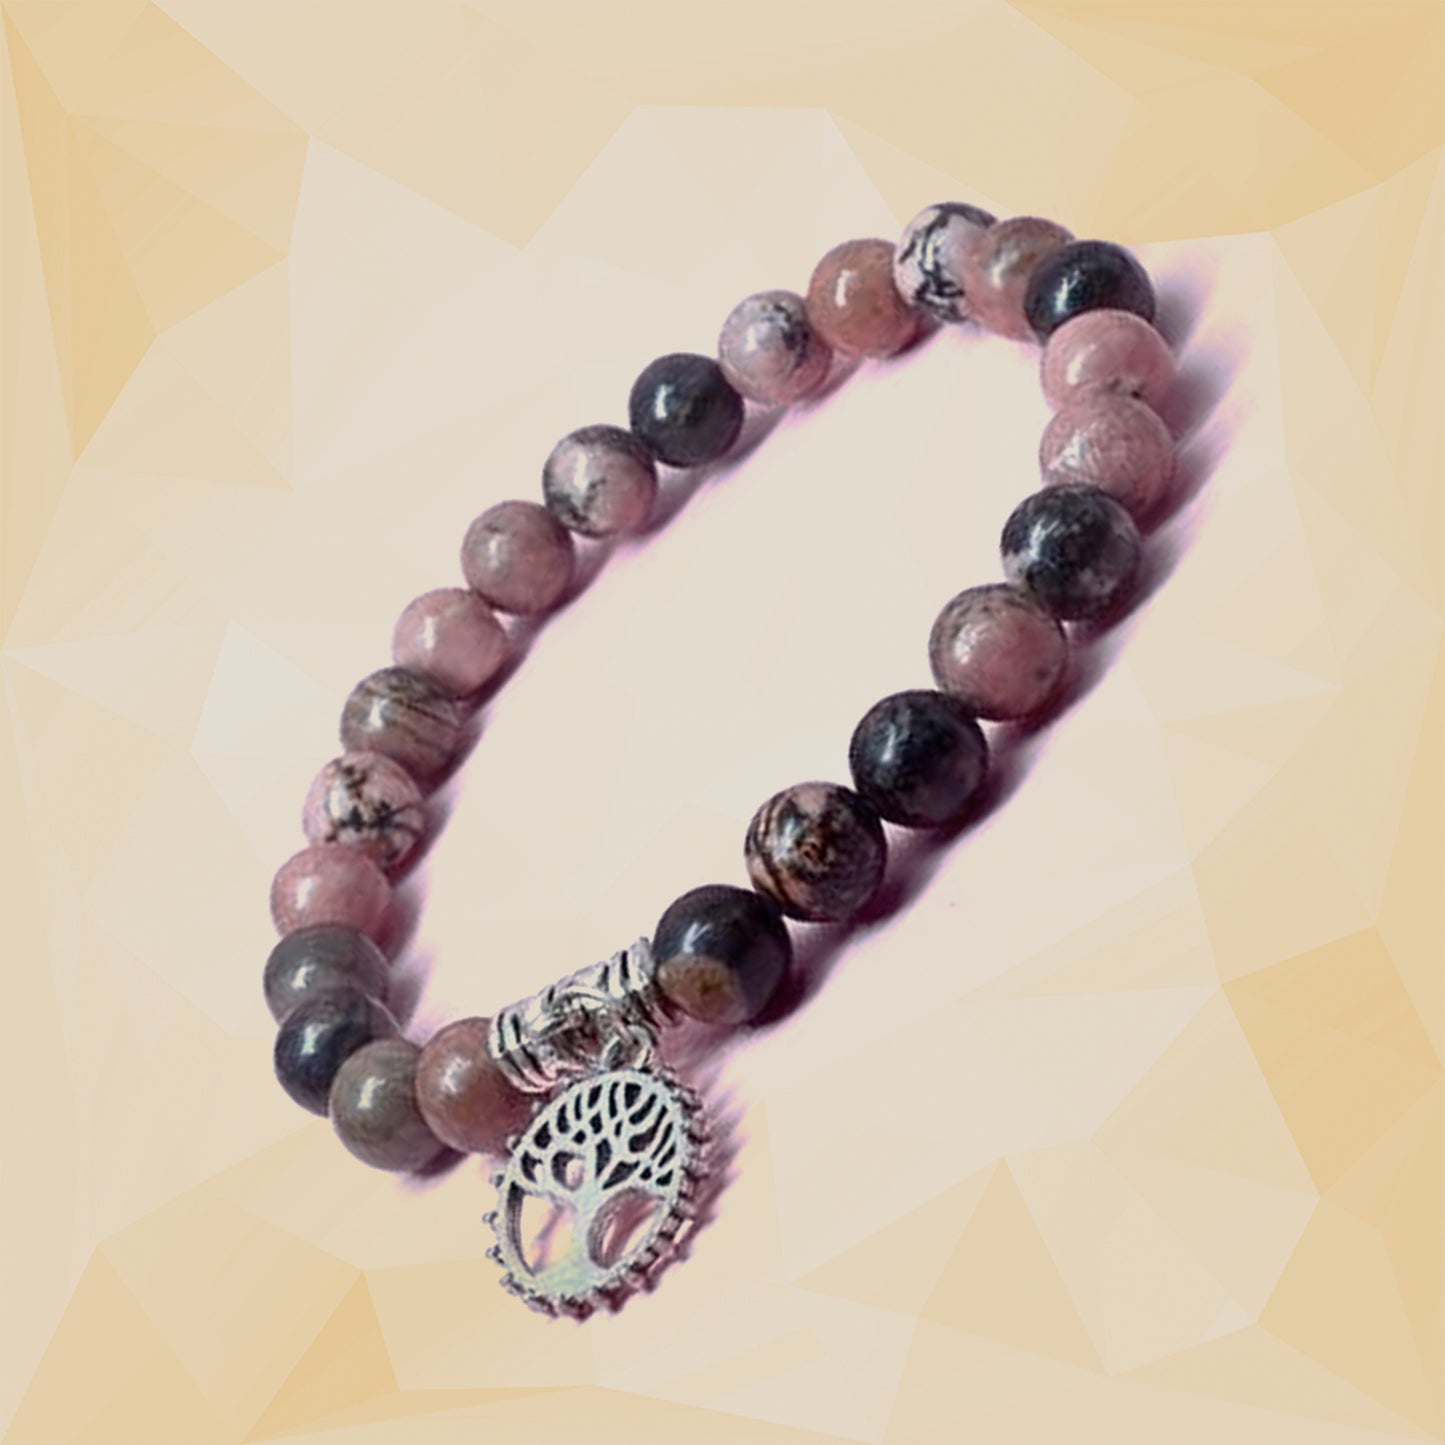 Rhodonite Healing Crystal Bracelet with Tree of Life Charm | For Emotional Balancing